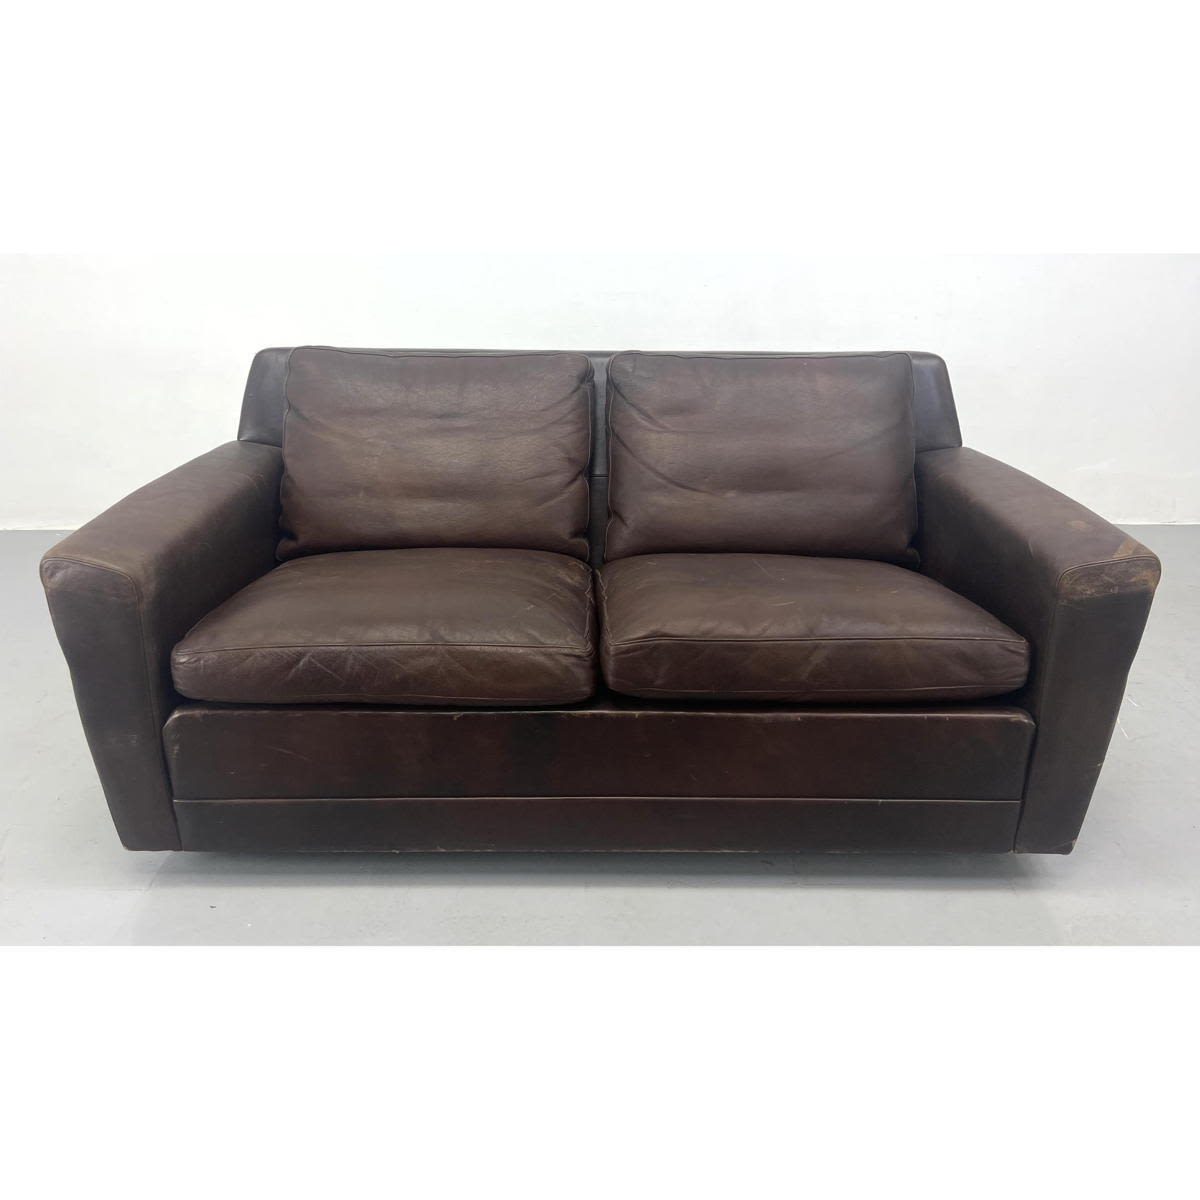 Art Deco Style Leather Love Seat 2a784d